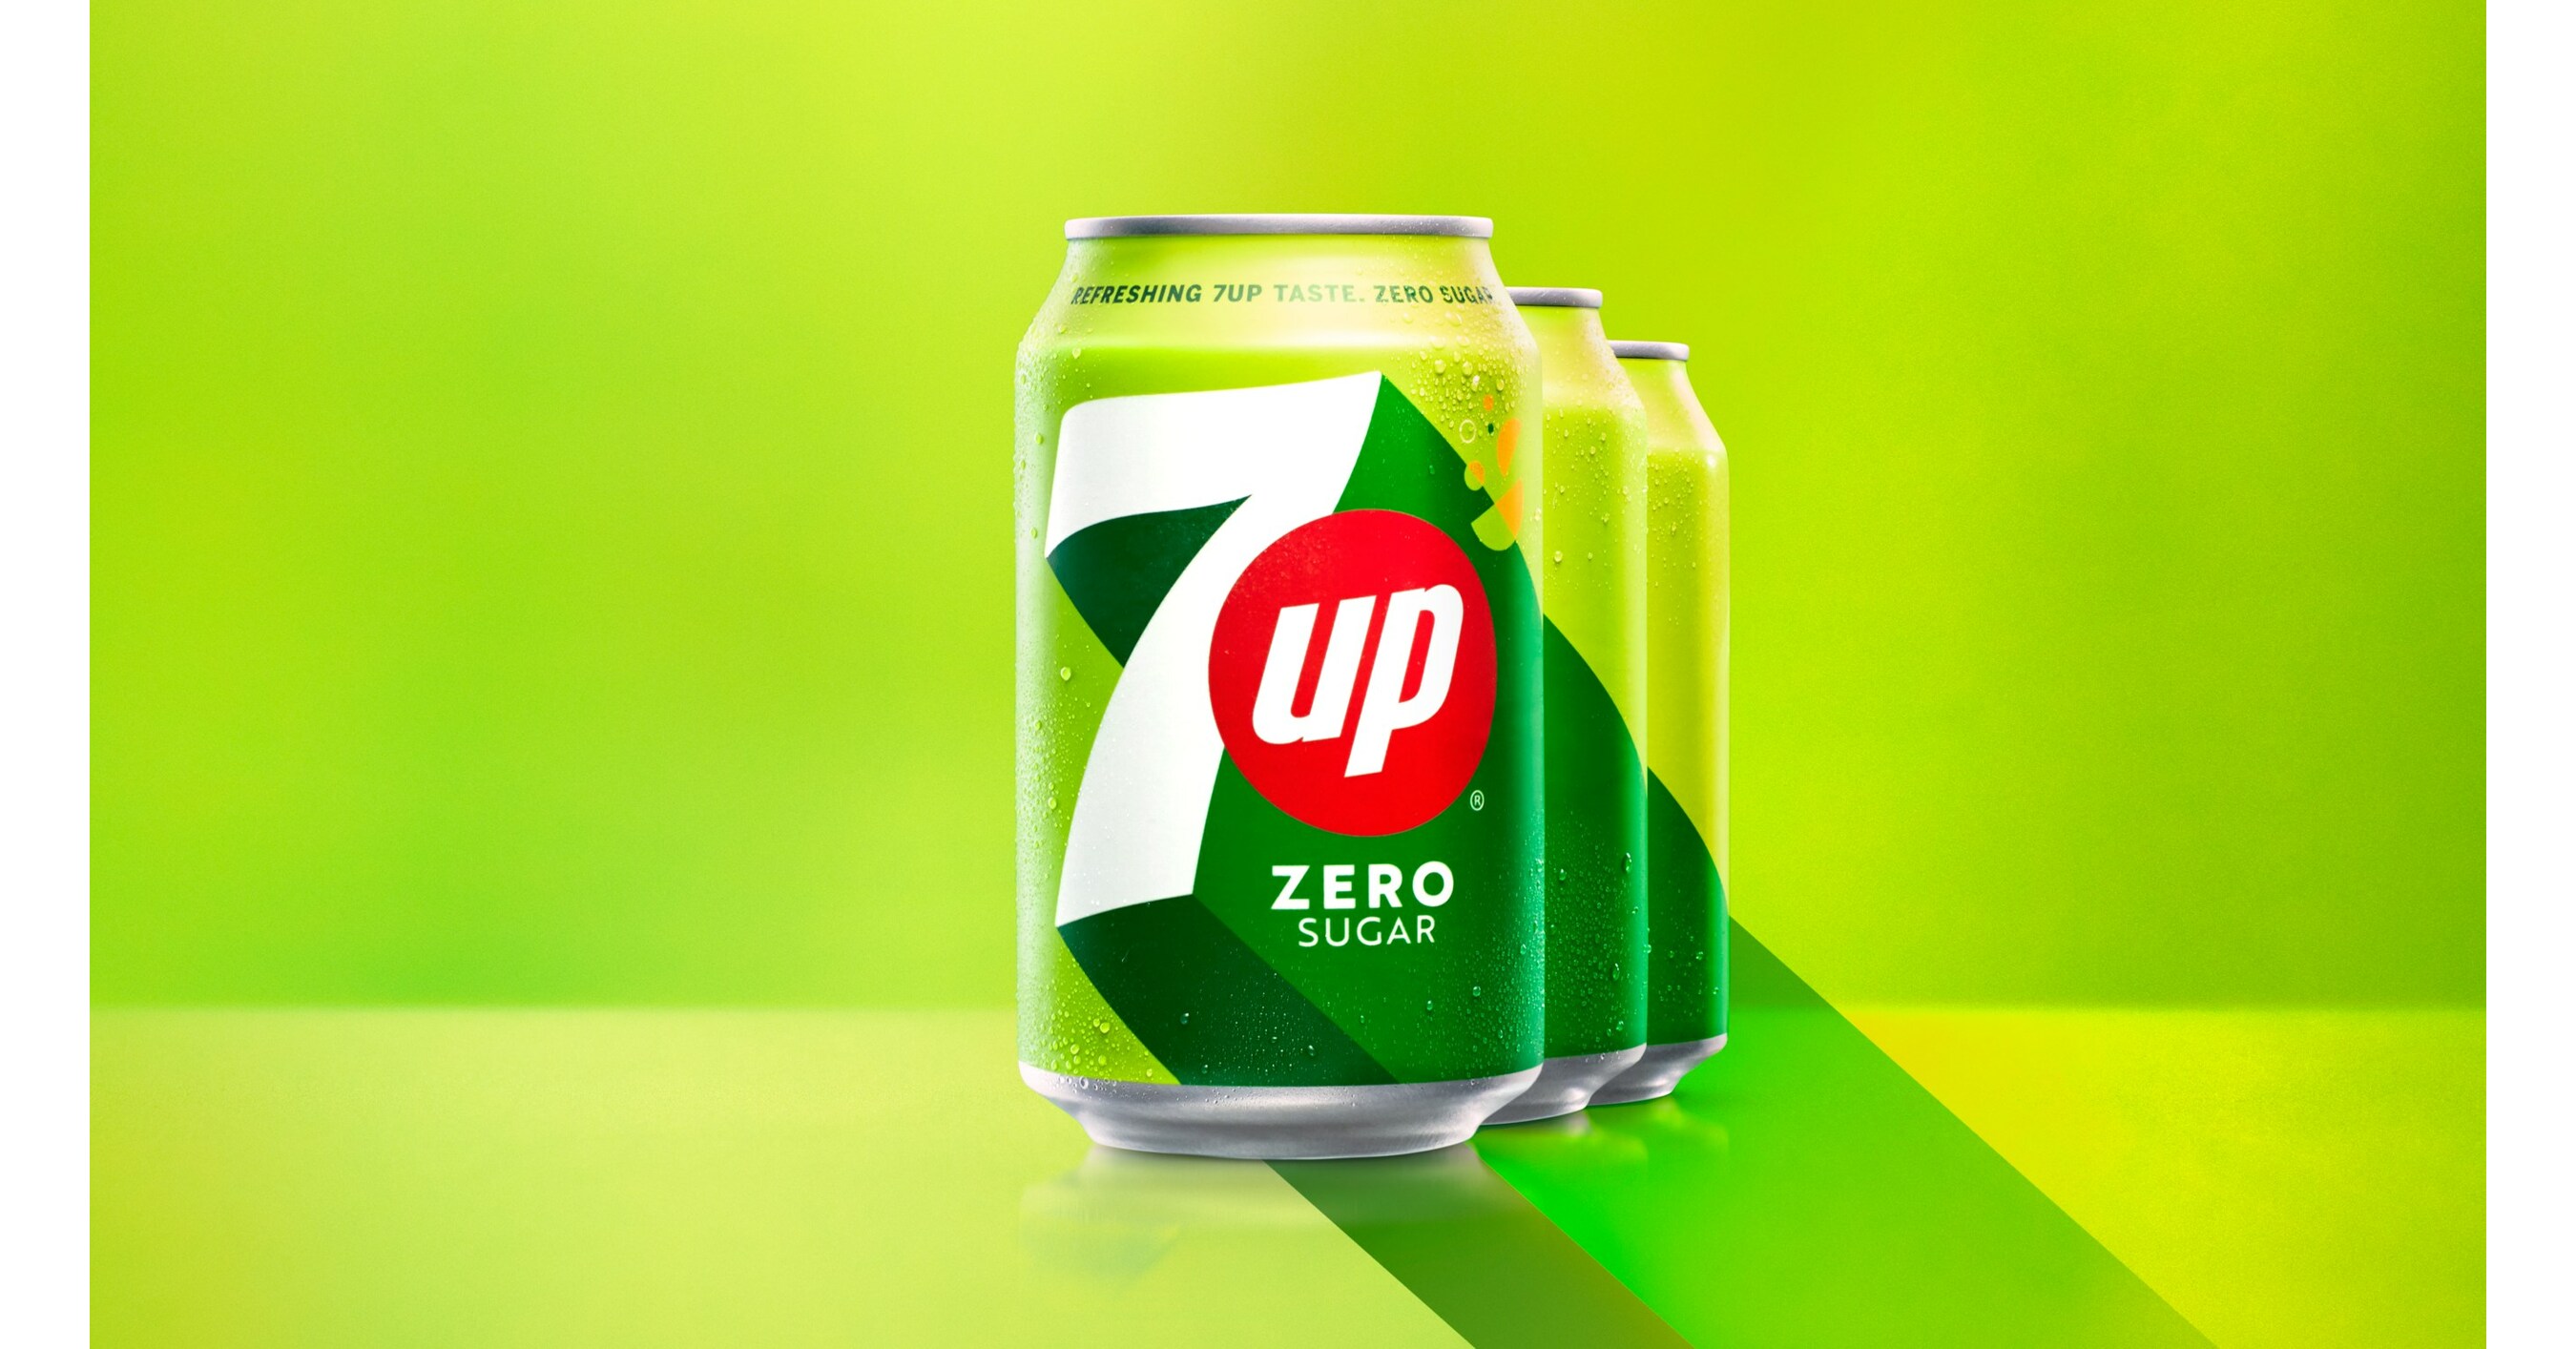 7UP® IS SPREADING MOMENTS OF UPLIFTMENT WITH ITS INTERNATIONAL